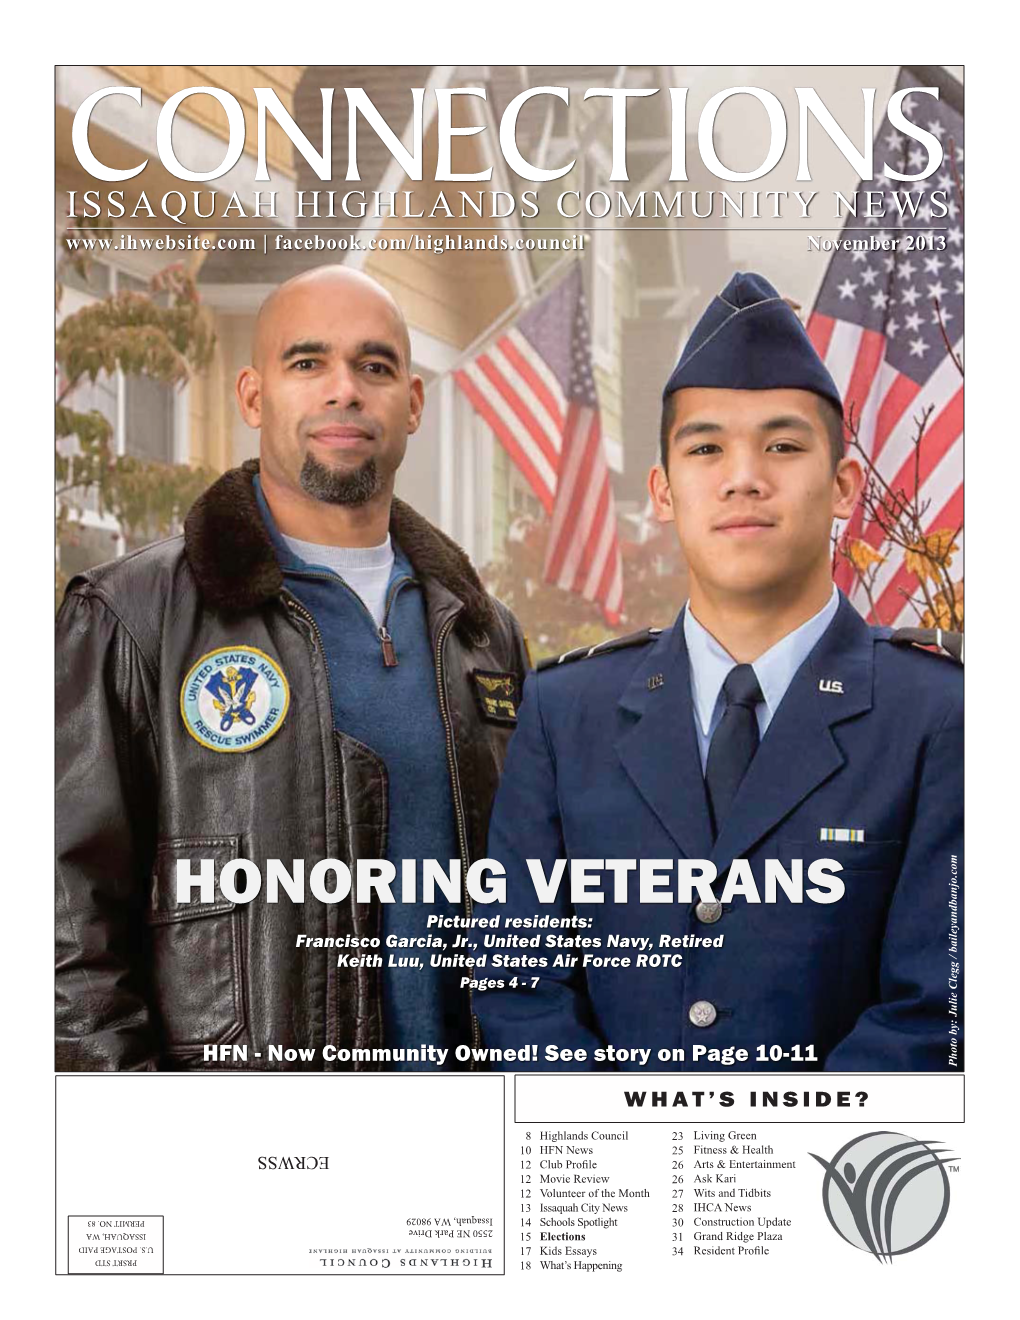 HONORING VETERANS Pictured Residents: Francisco Garcia, Jr., United States Navy, Retired Keith Luu, United States Air Force ROTC Pages 4 - 7